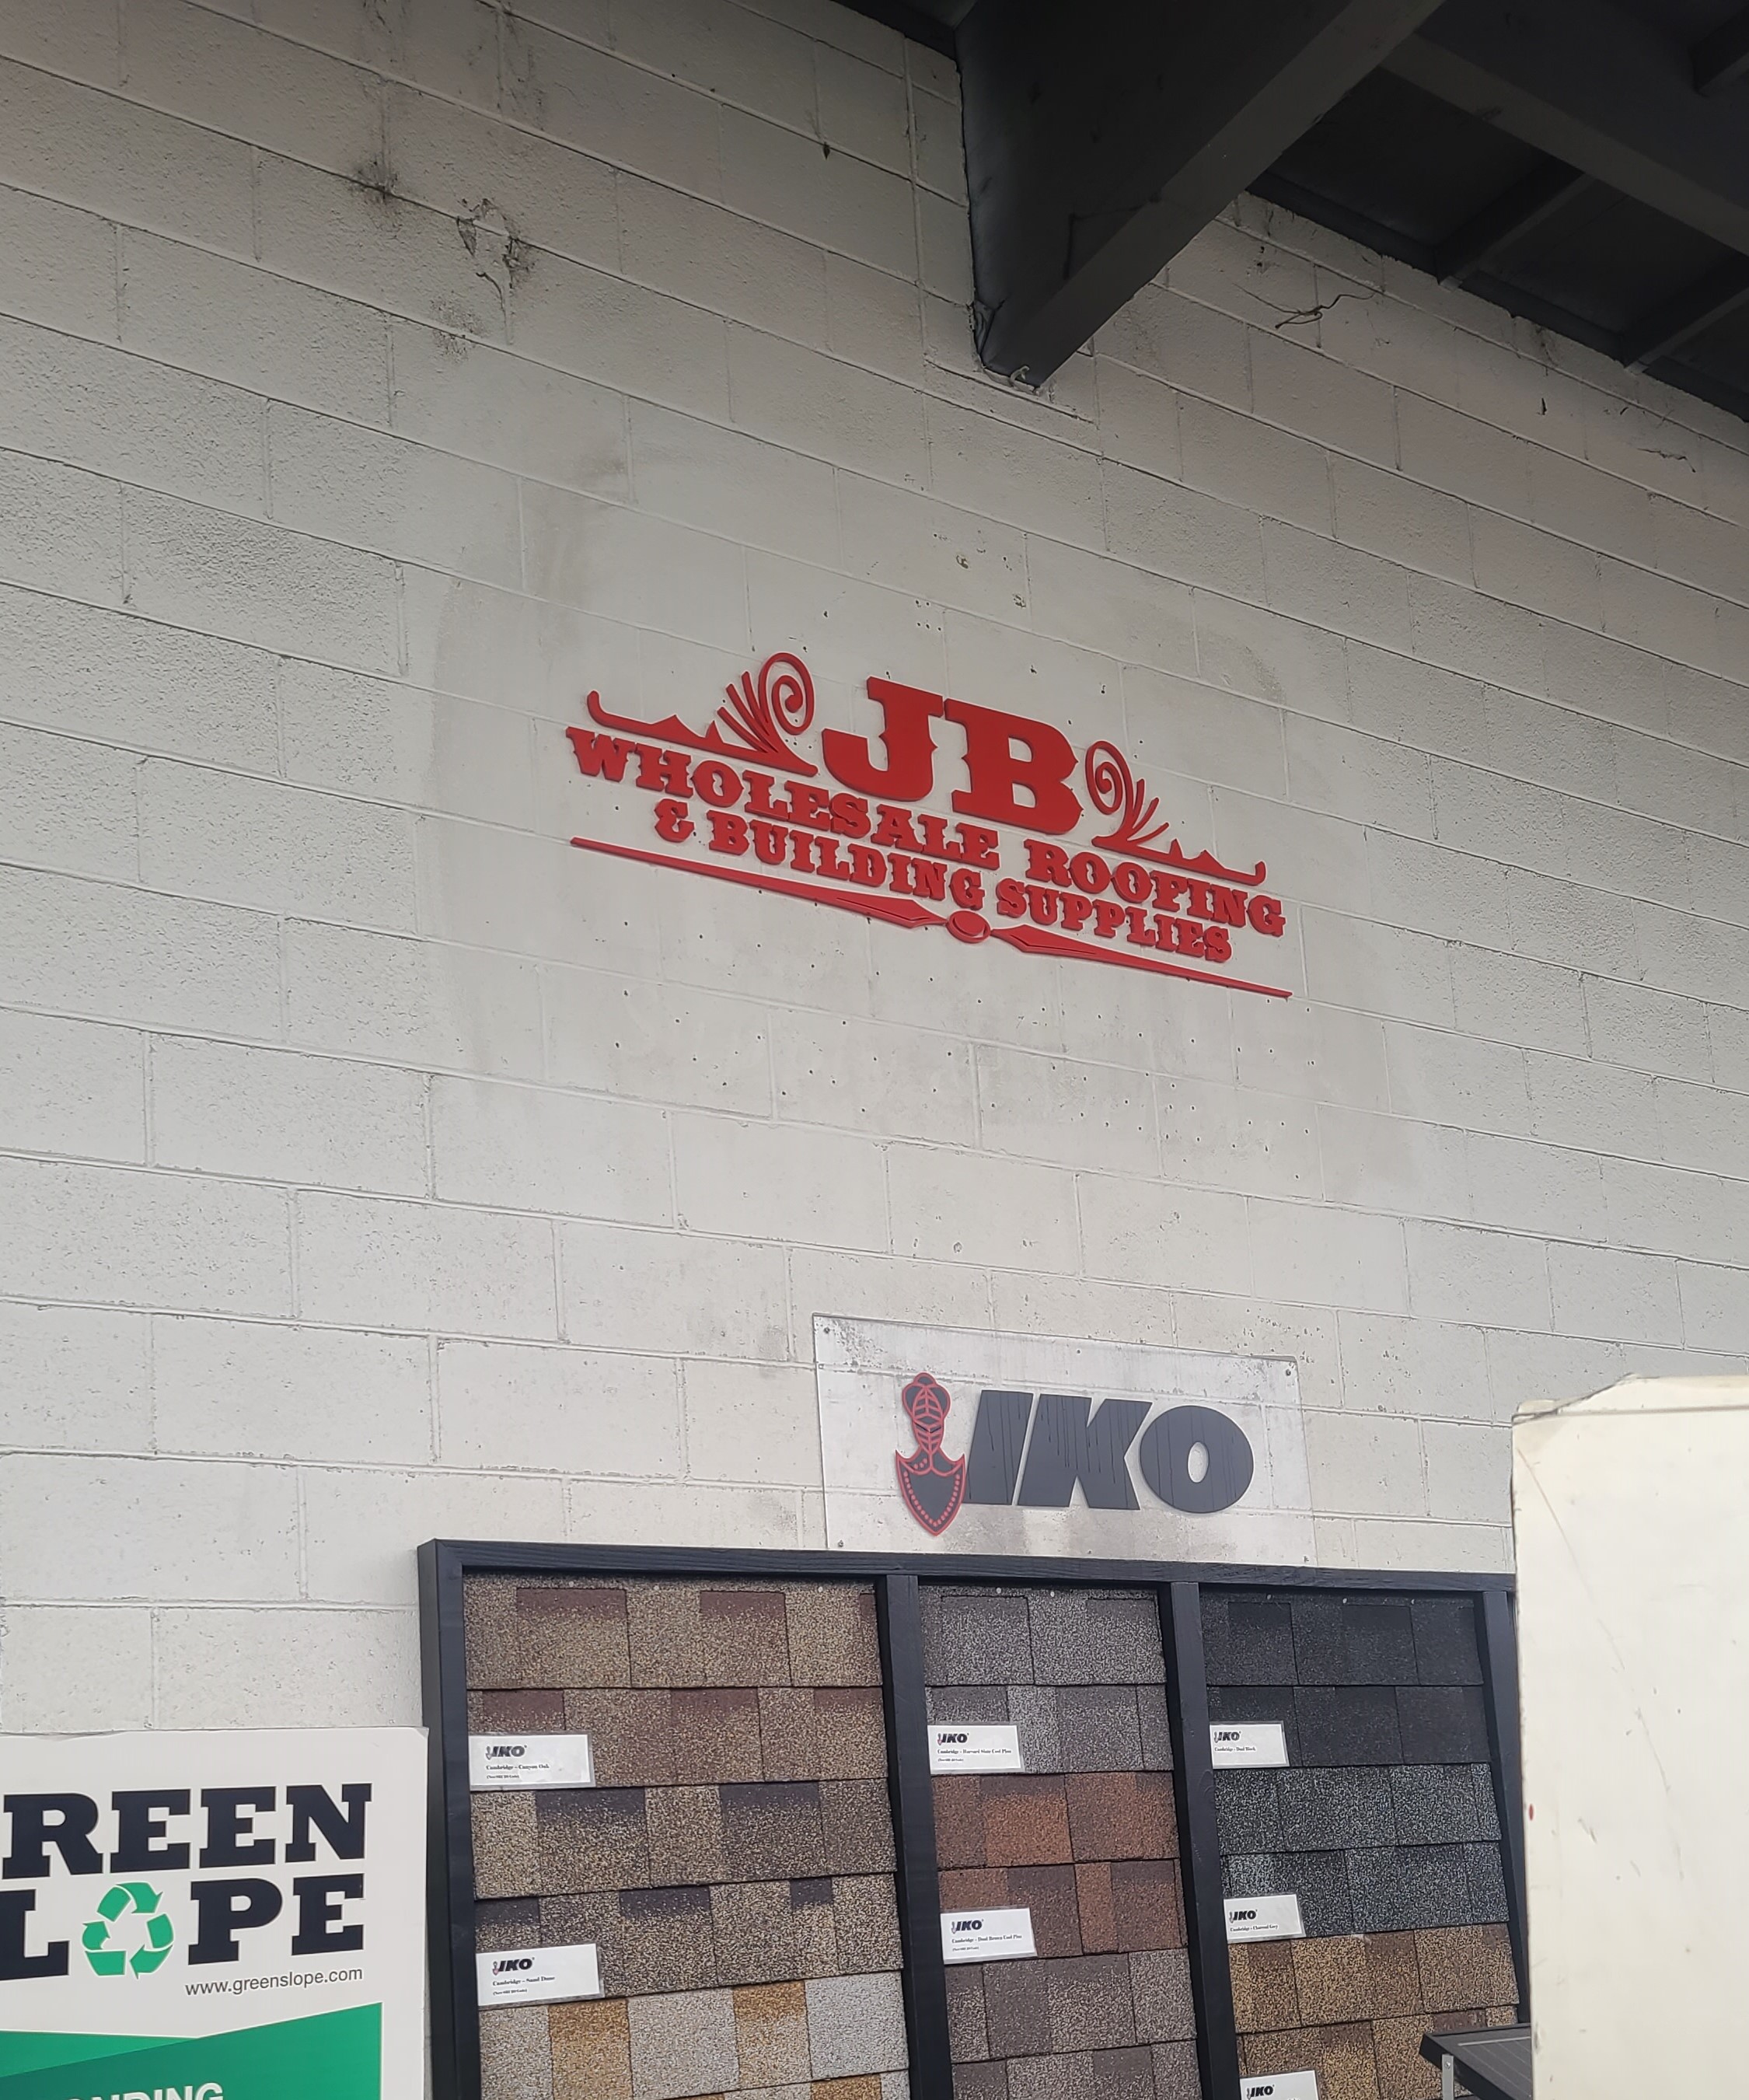 These are the maxmetal 3D letters sign we fabricated and installed for JB Wholesale Roofing & Building Supplies' Azusa location.